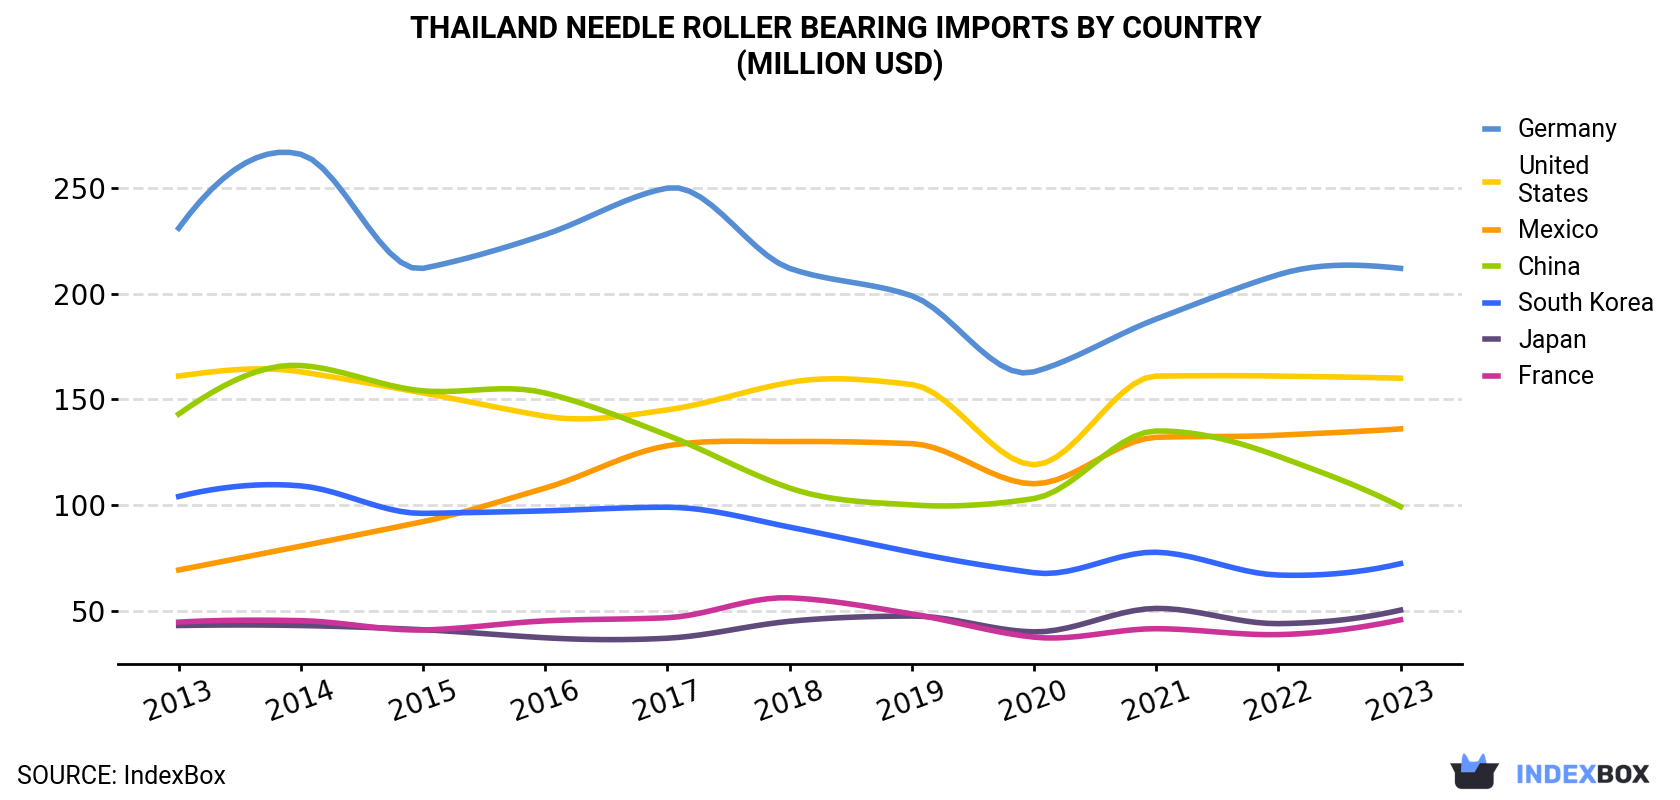 Thailand Needle Roller Bearing Imports By Country (Million USD)